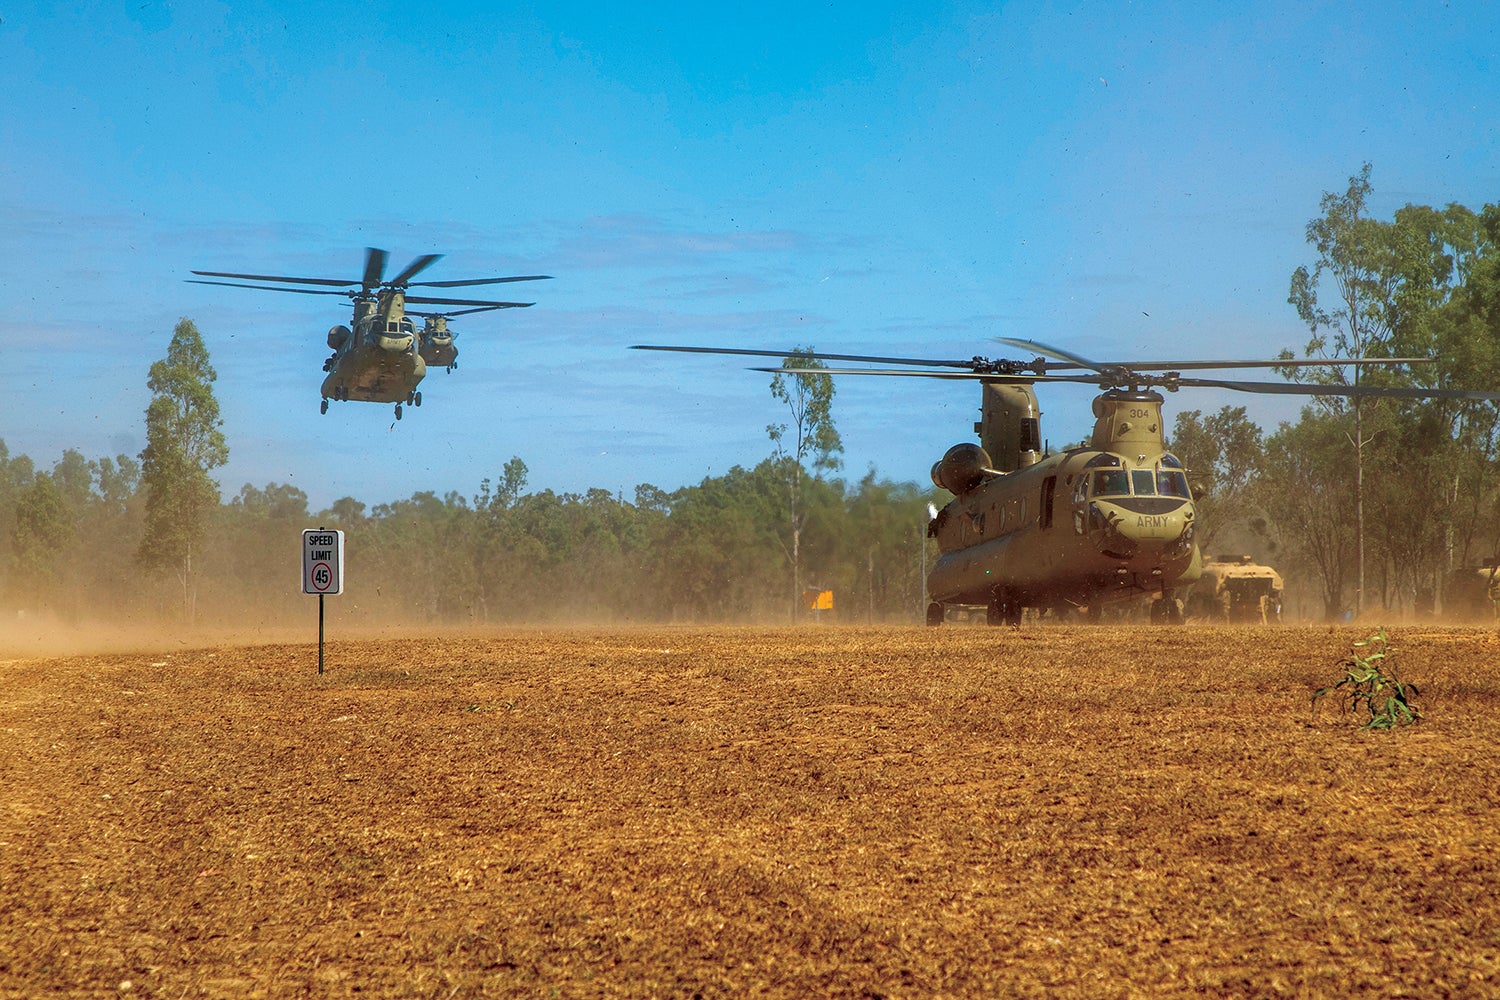 CH-47 Chinook helicopters land during Exercise Talisman Sabre in Australia in July. (Credit: U.S. Army/Spc. Derick Fennell)